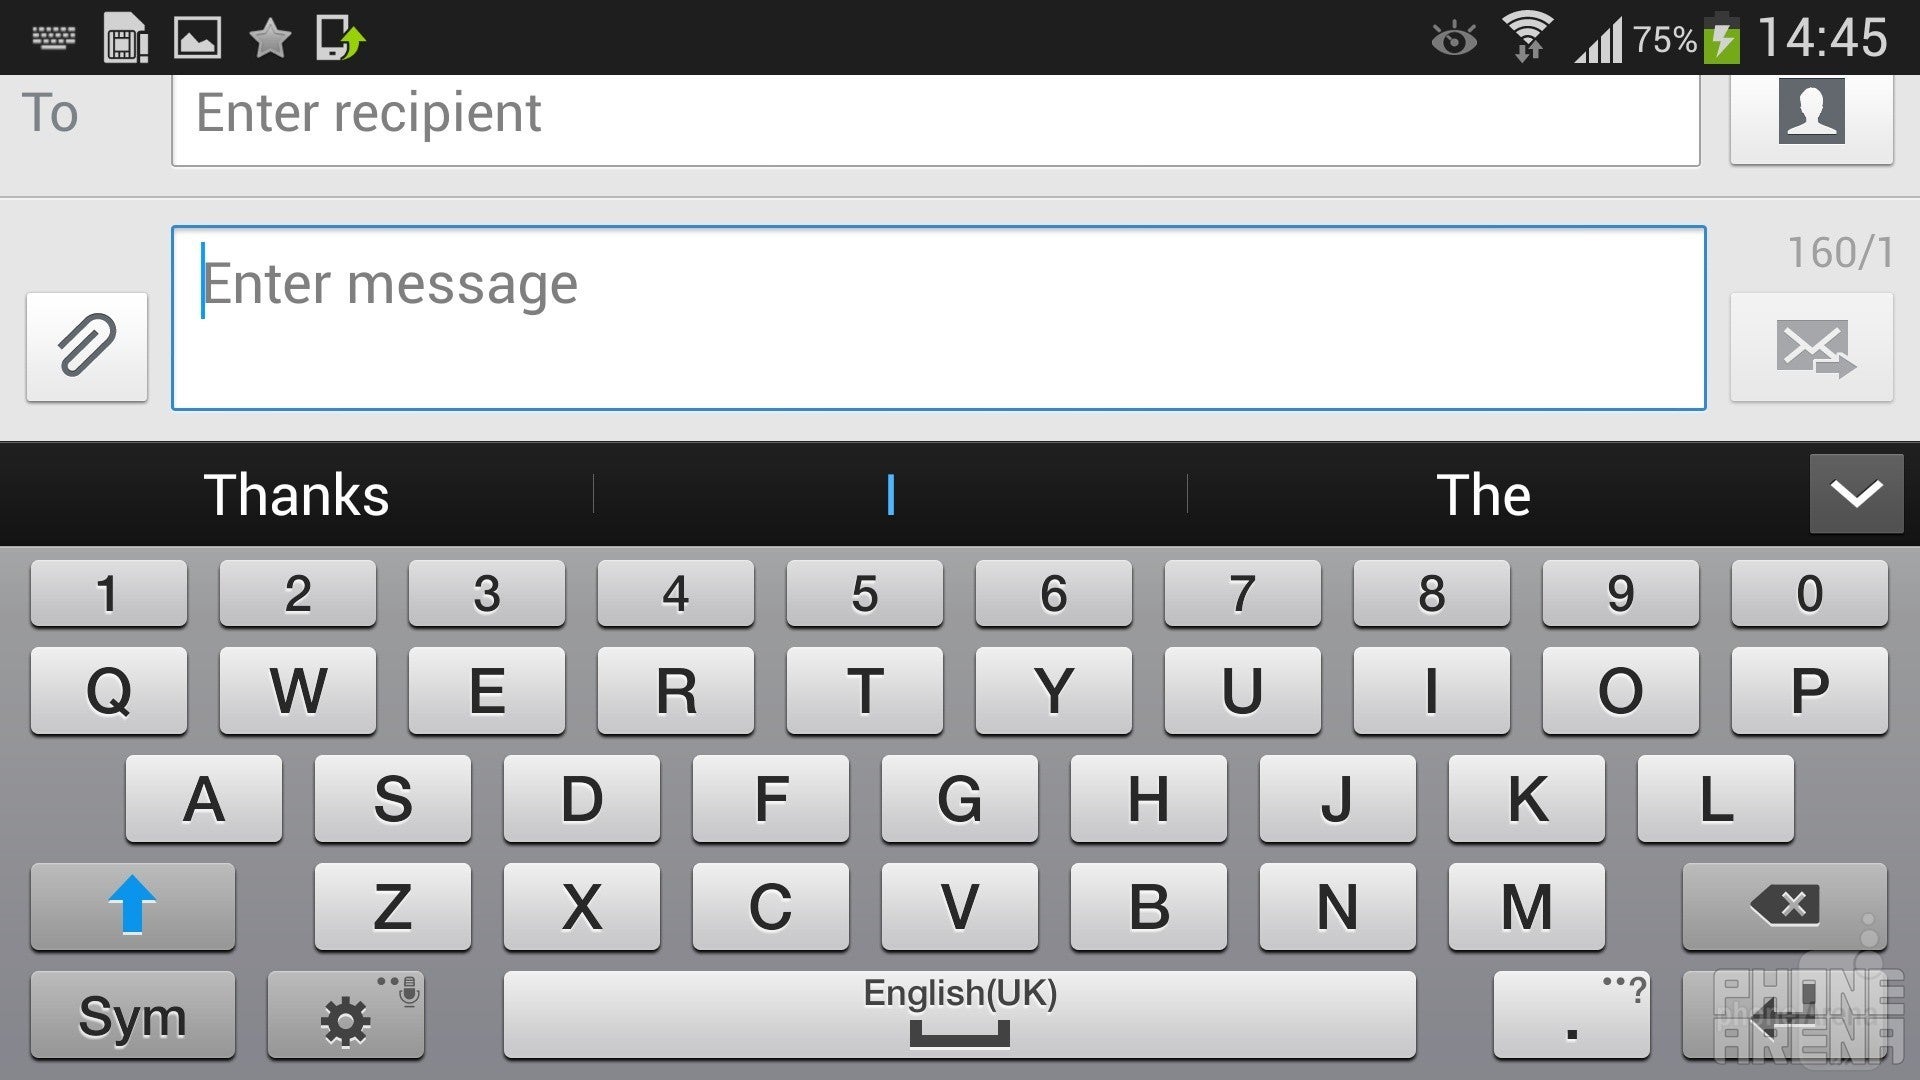 Samsung Galaxy S4's default QWERTY keyboard layout - Samsung Galaxy S4 Review